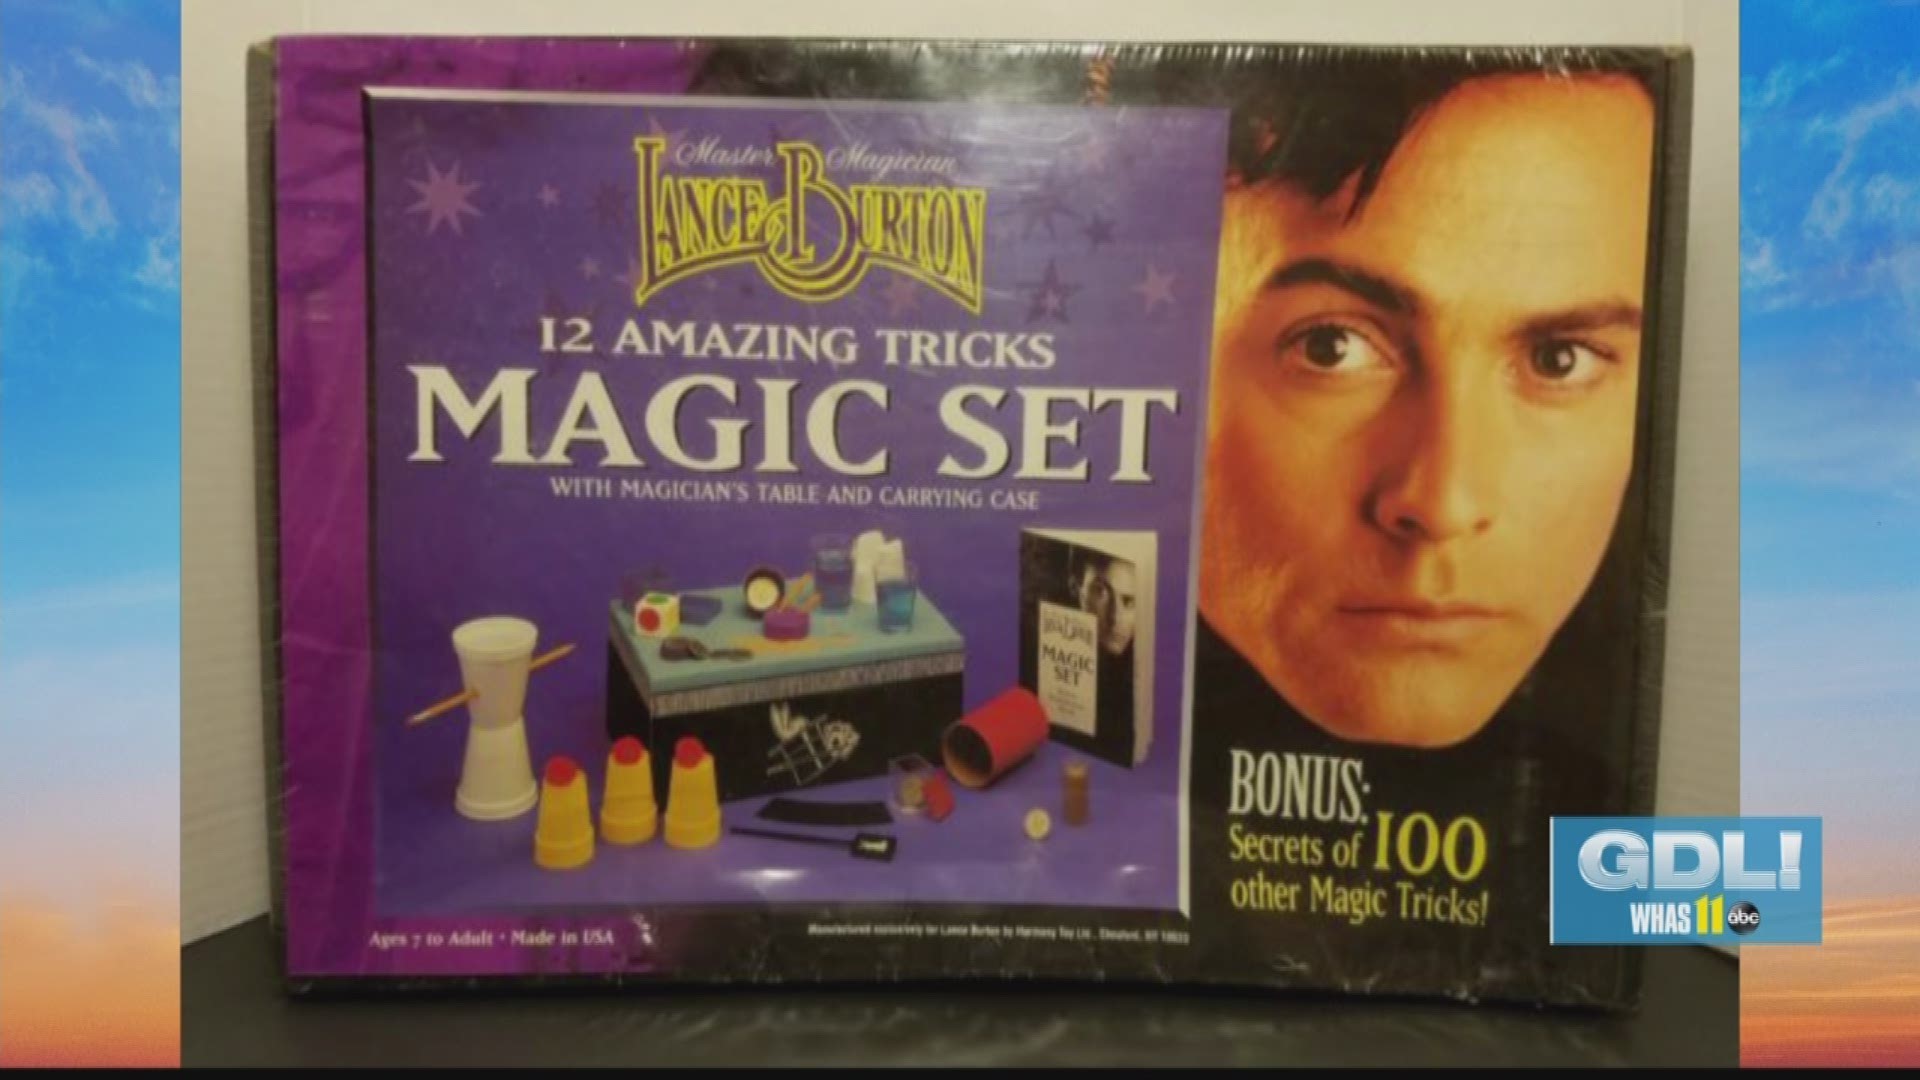 Magician Lance Burton reveals the Louisville magician who ignited his interest in magic